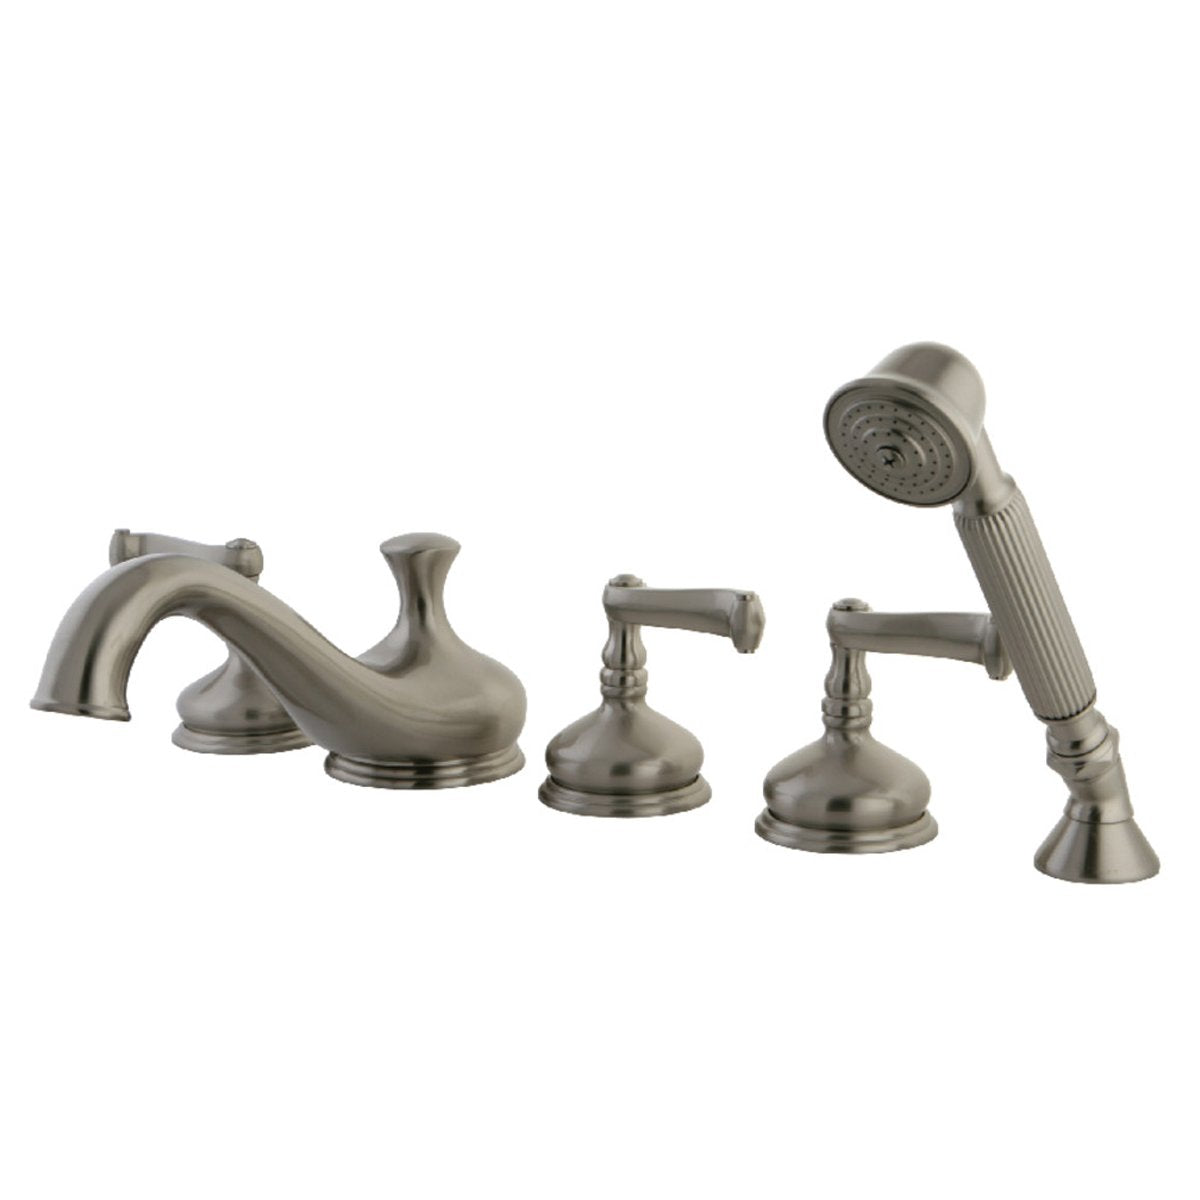 Kingston Brass Roman Tub Faucet with Hand Shower in Brushed Nickel